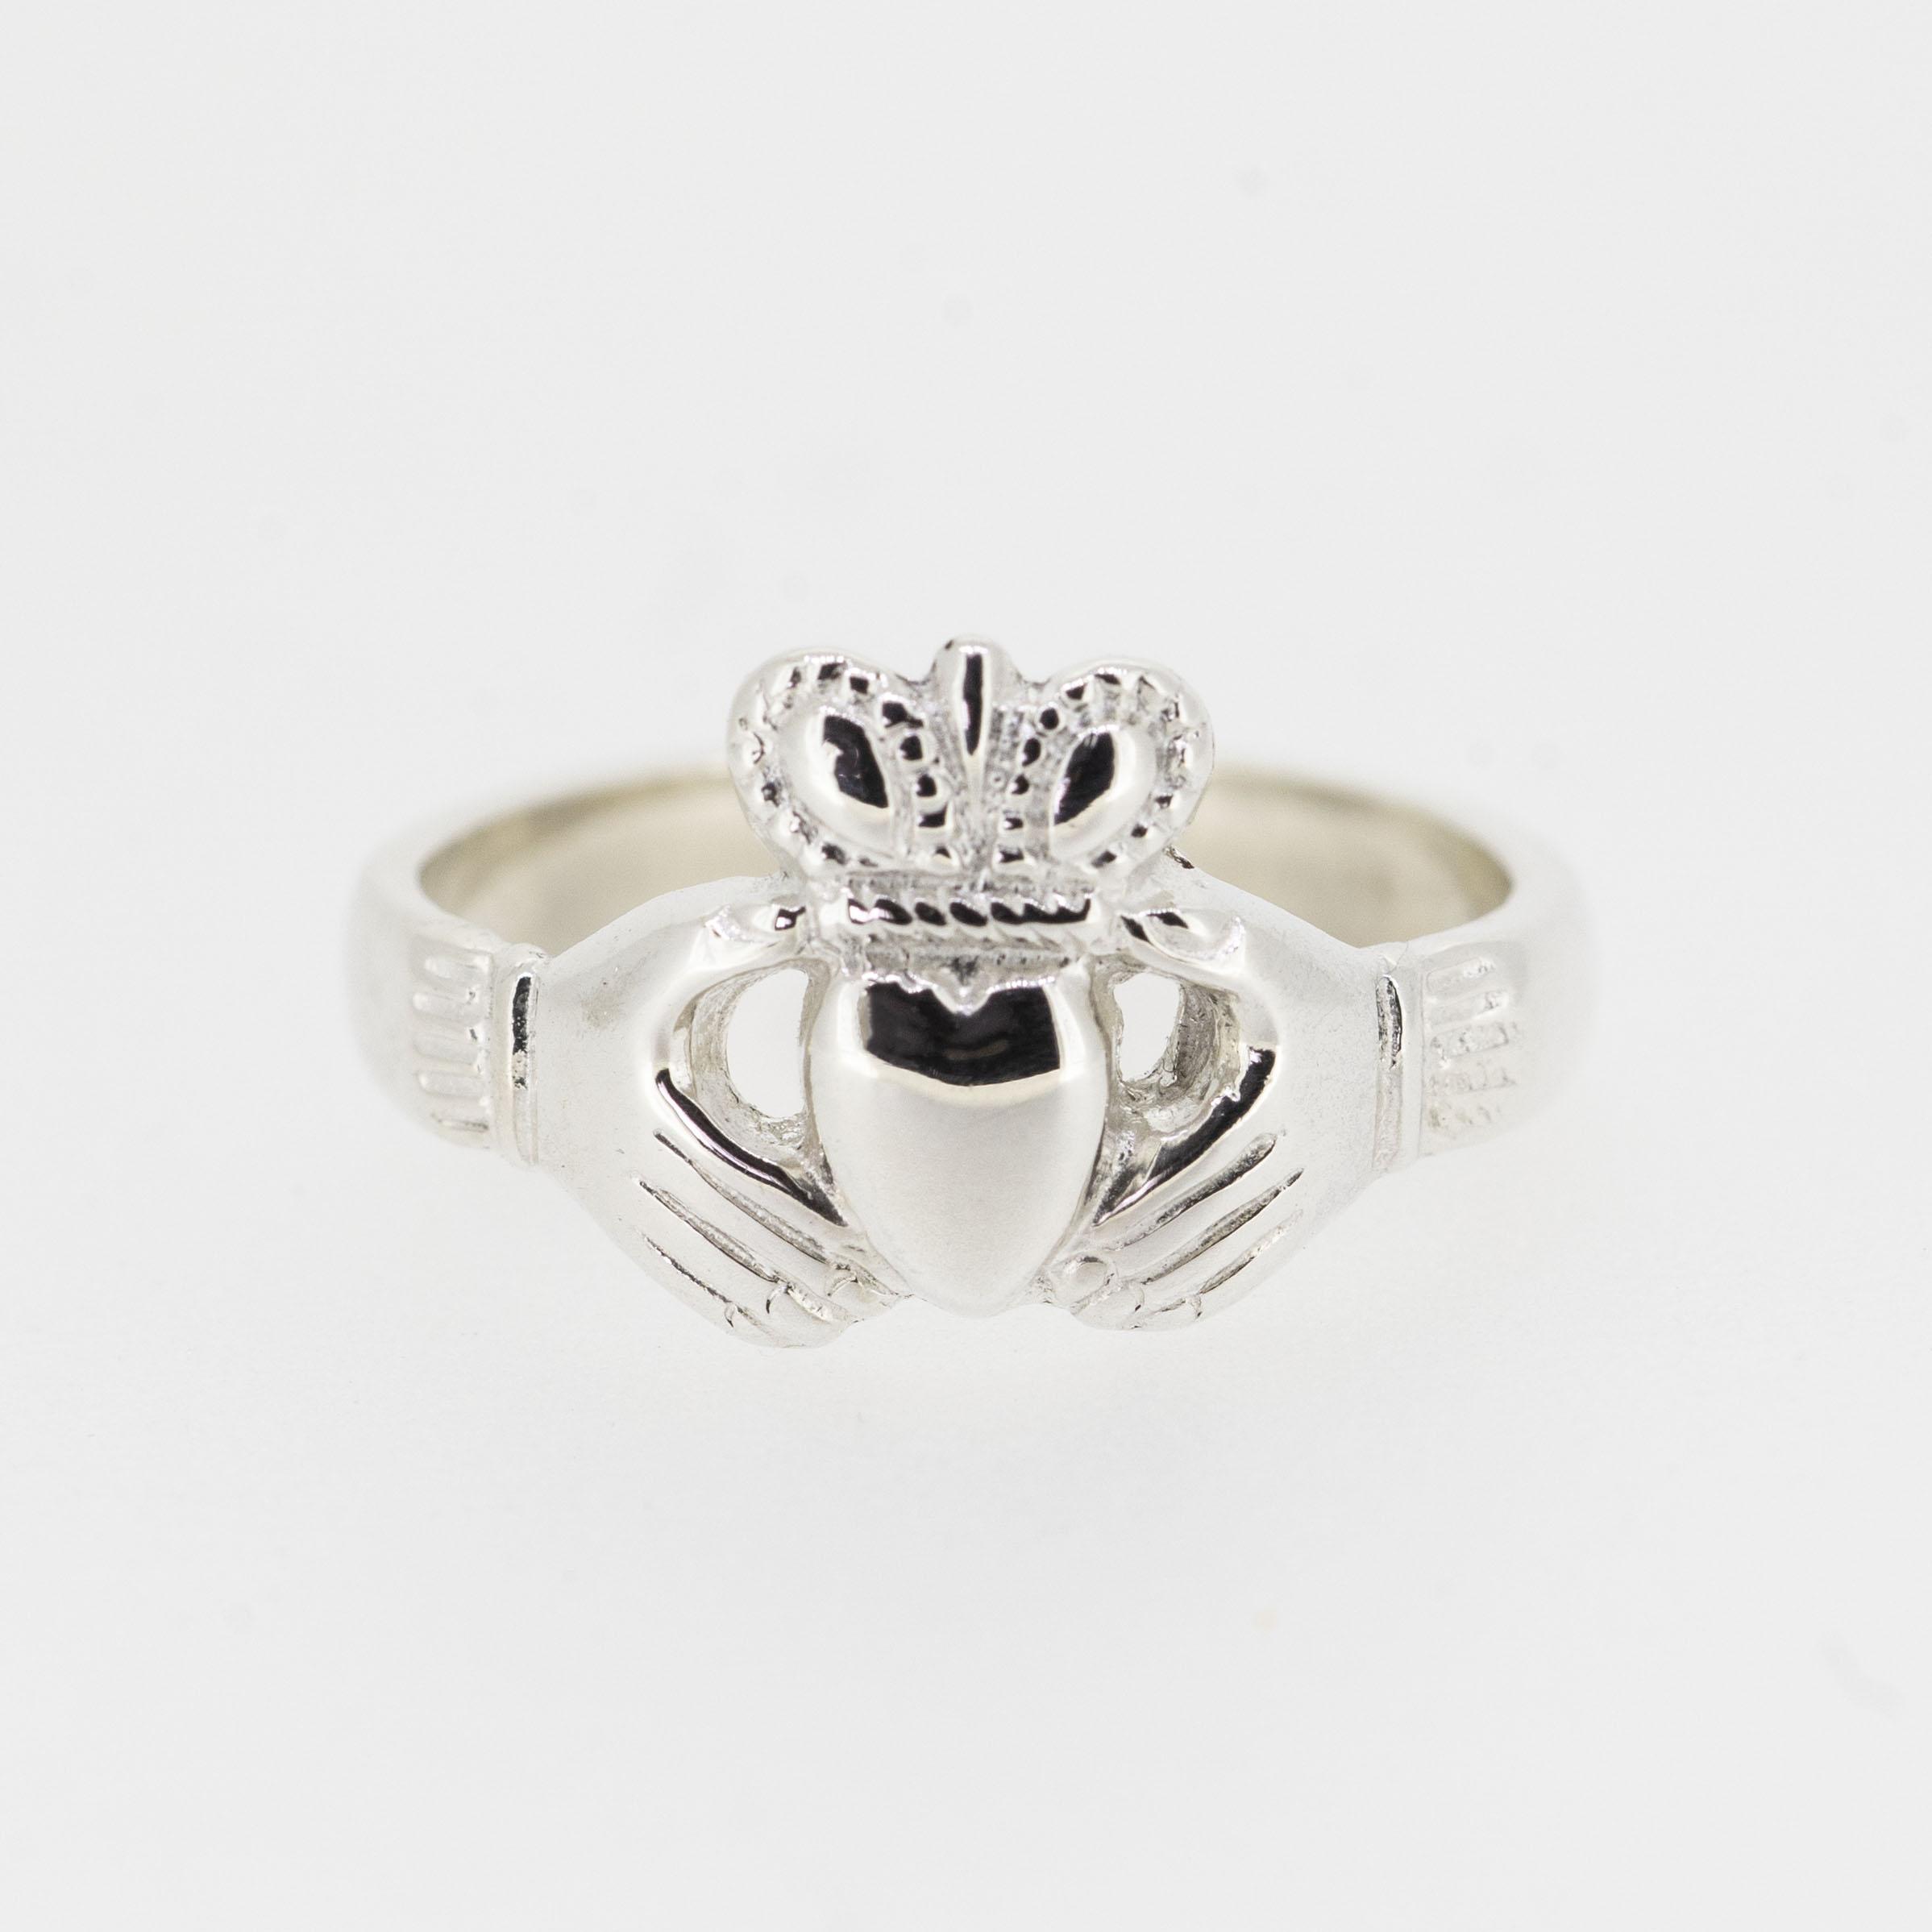 LADIES CLADDAGH RING STERLING SILVER - Irish Centre